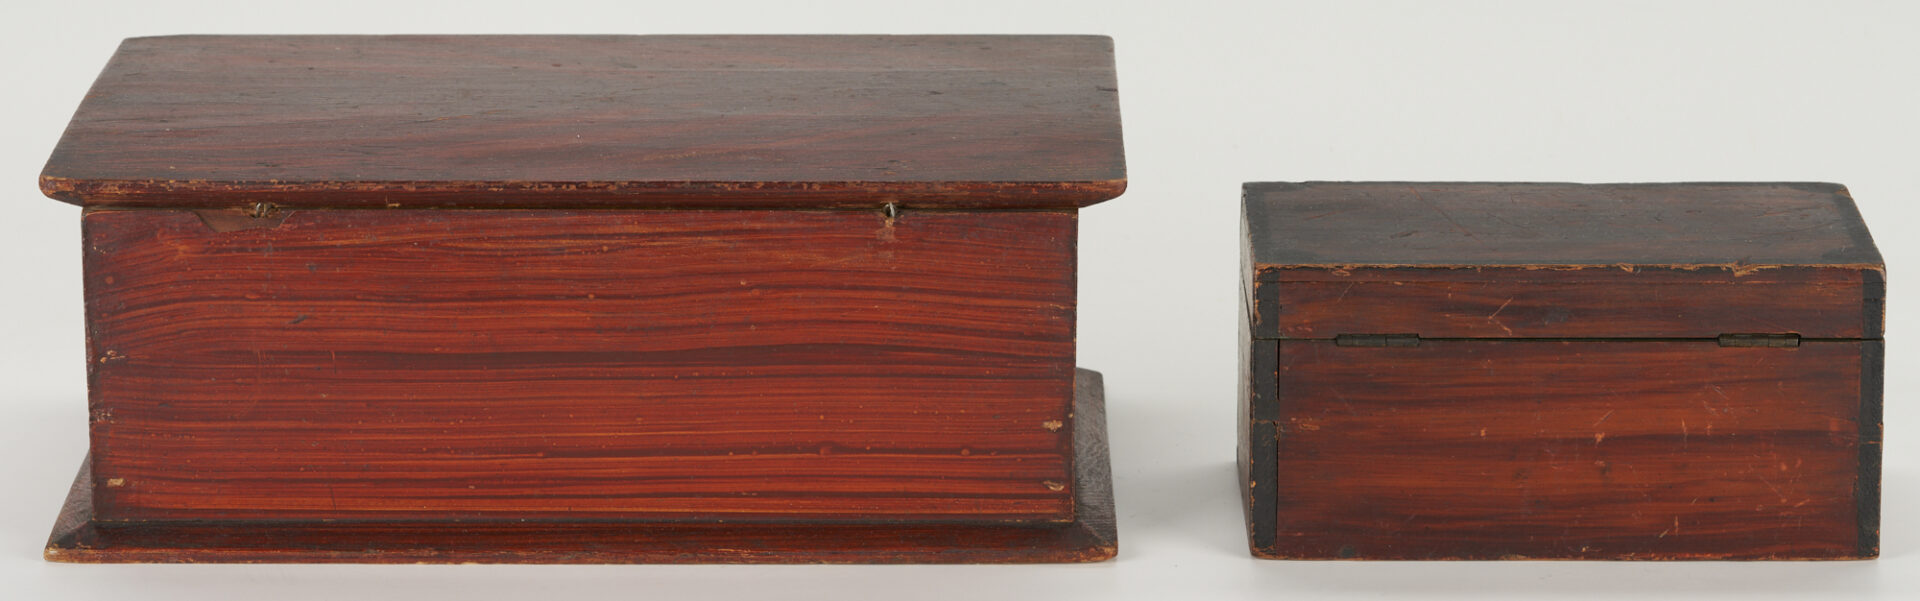 Lot 190: 3 American Folk Art Grain Painted Boxes, incl. Initialed Document Box